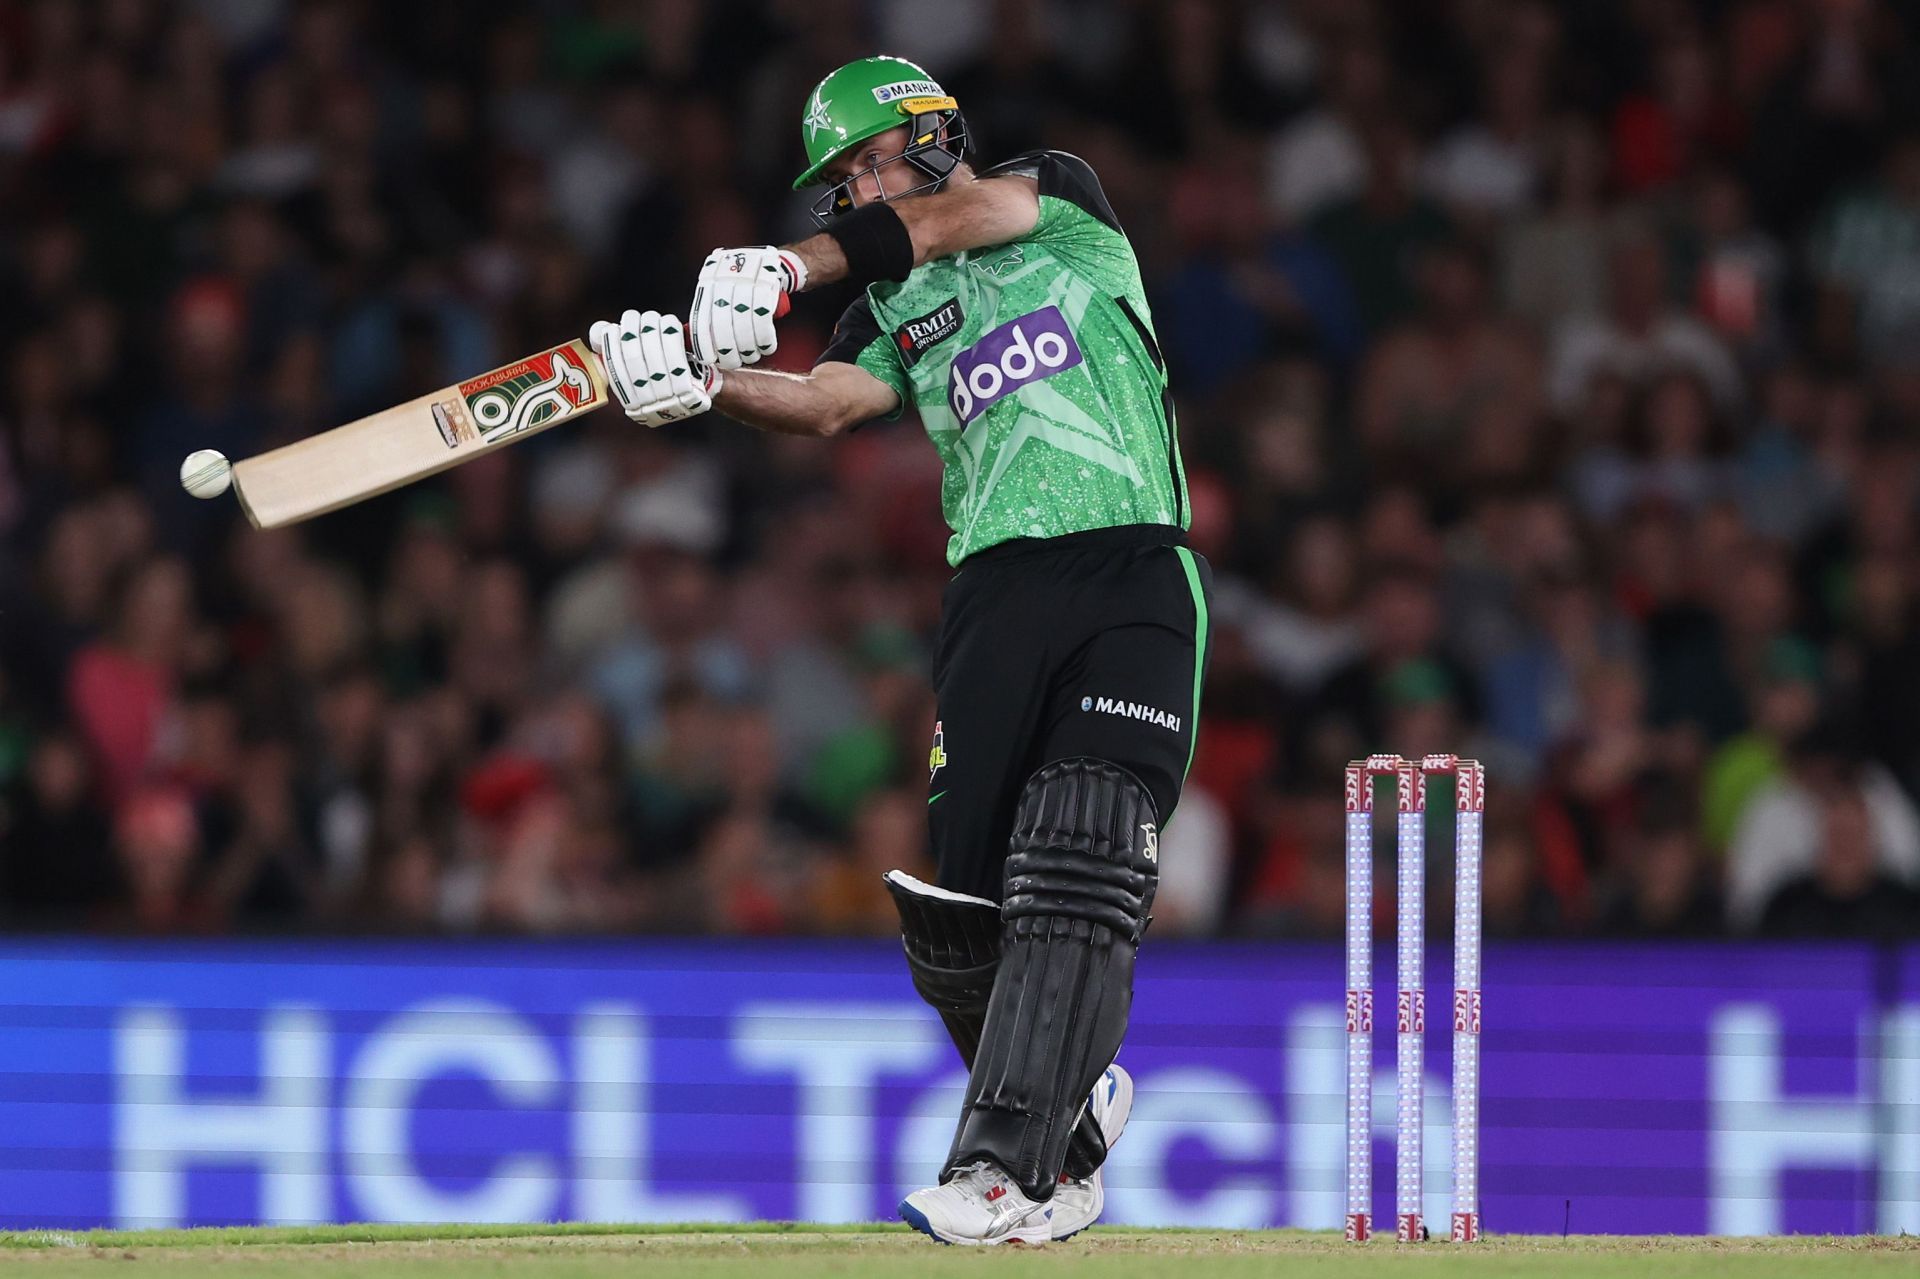 Glenn Maxwell in action during the BBL. (Pic: Getty Images)